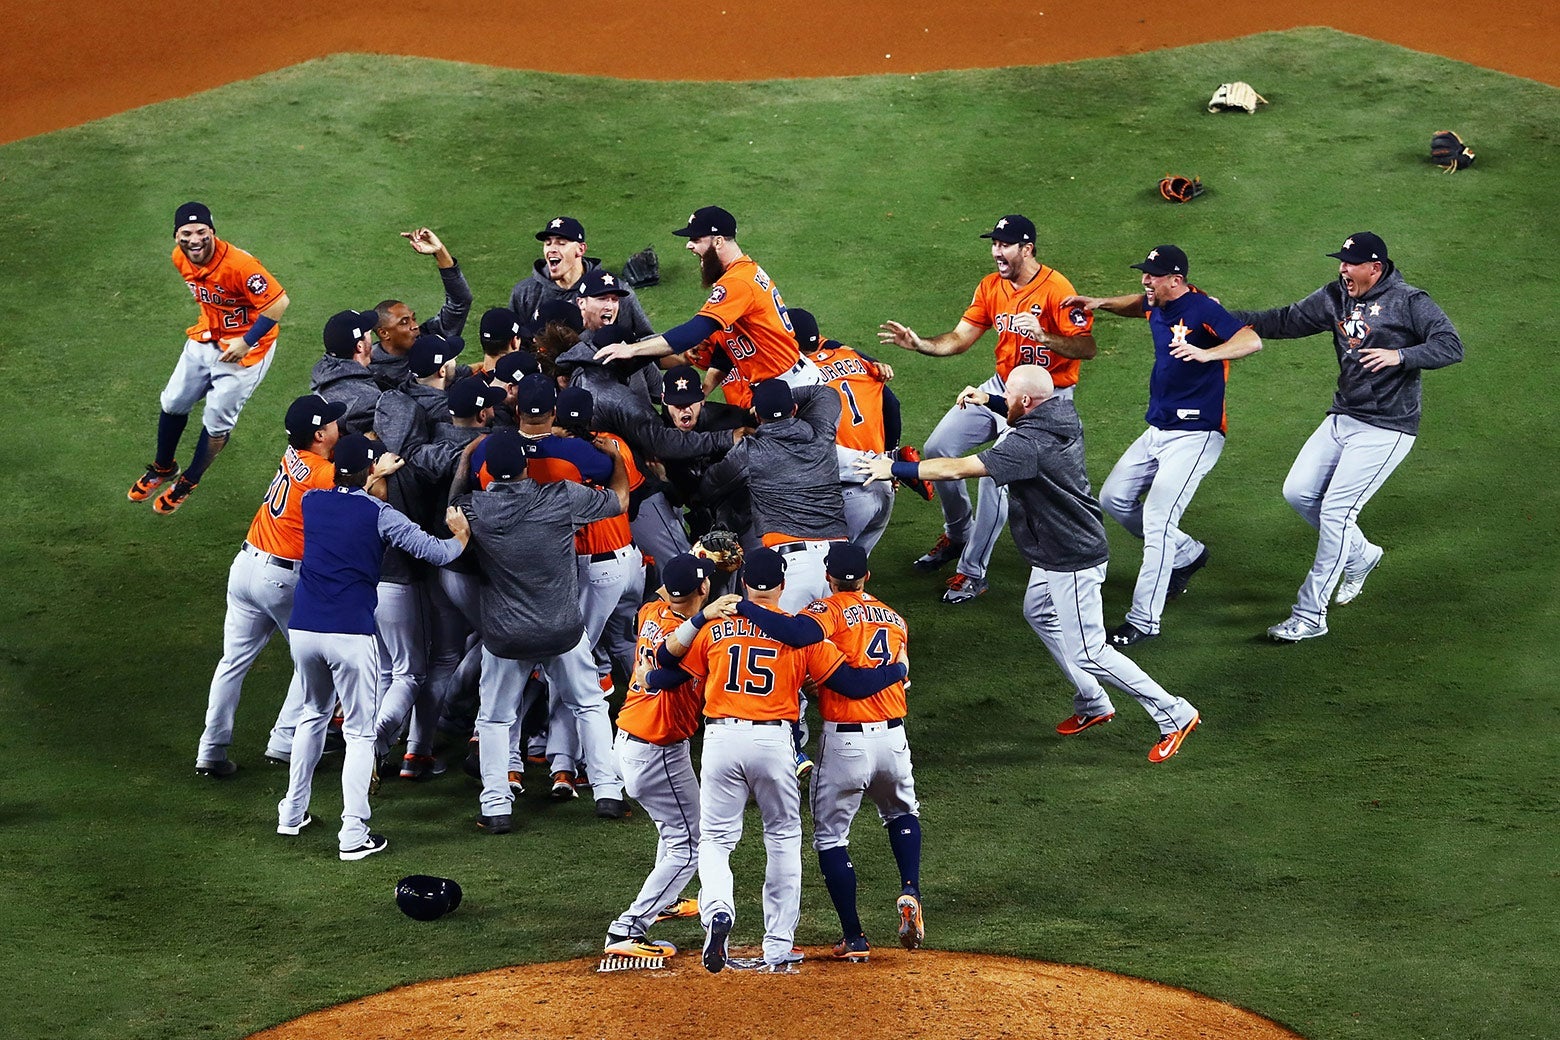 Astros team members rush toward one another near the pitcher’s mound.